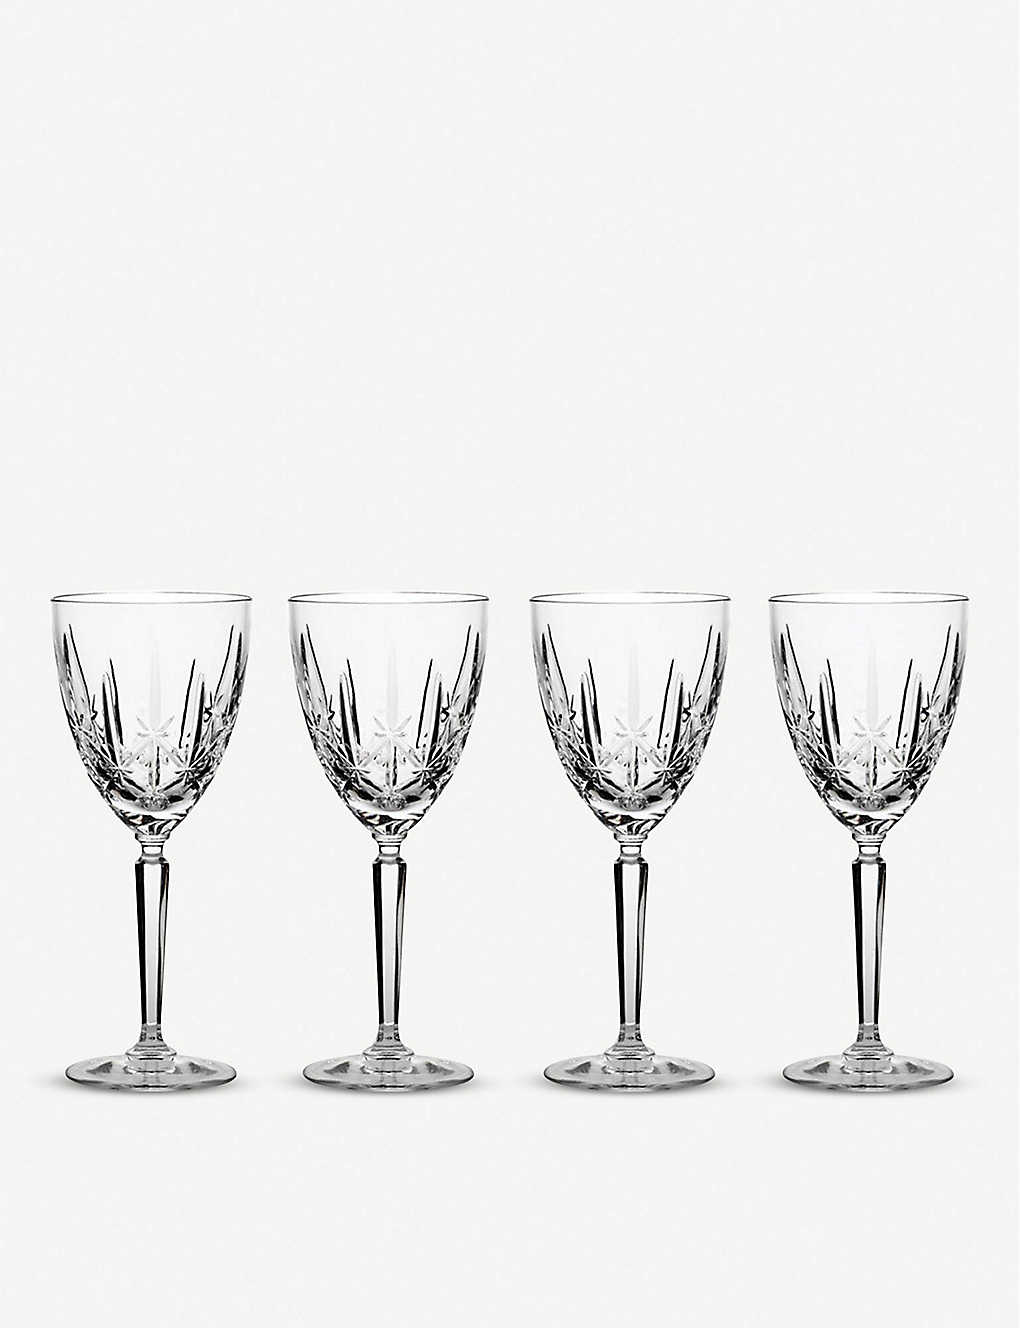 NEW Waterford Glass Set Wine Goblets Marquis Sparkle Set of 4 Crystal 156156 